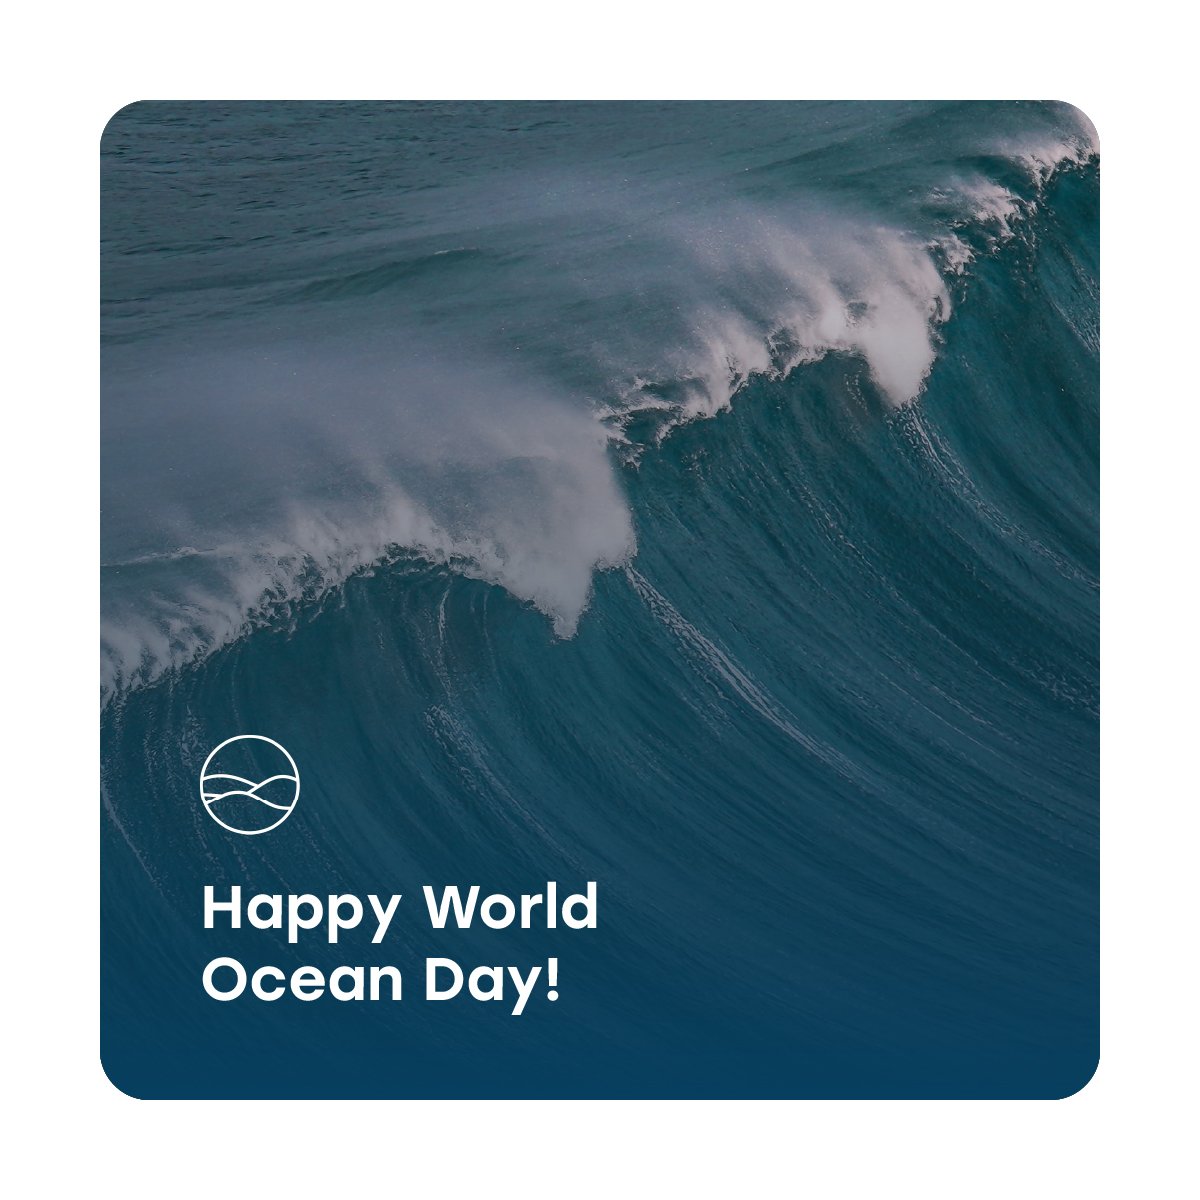 Happy #WorldOceanDay! 2022 has been the year of commitment. IMPAC5, COP15 and COP27 laid the foundations for what we should aim at and expect in conservation. 2023 must be the year of action.